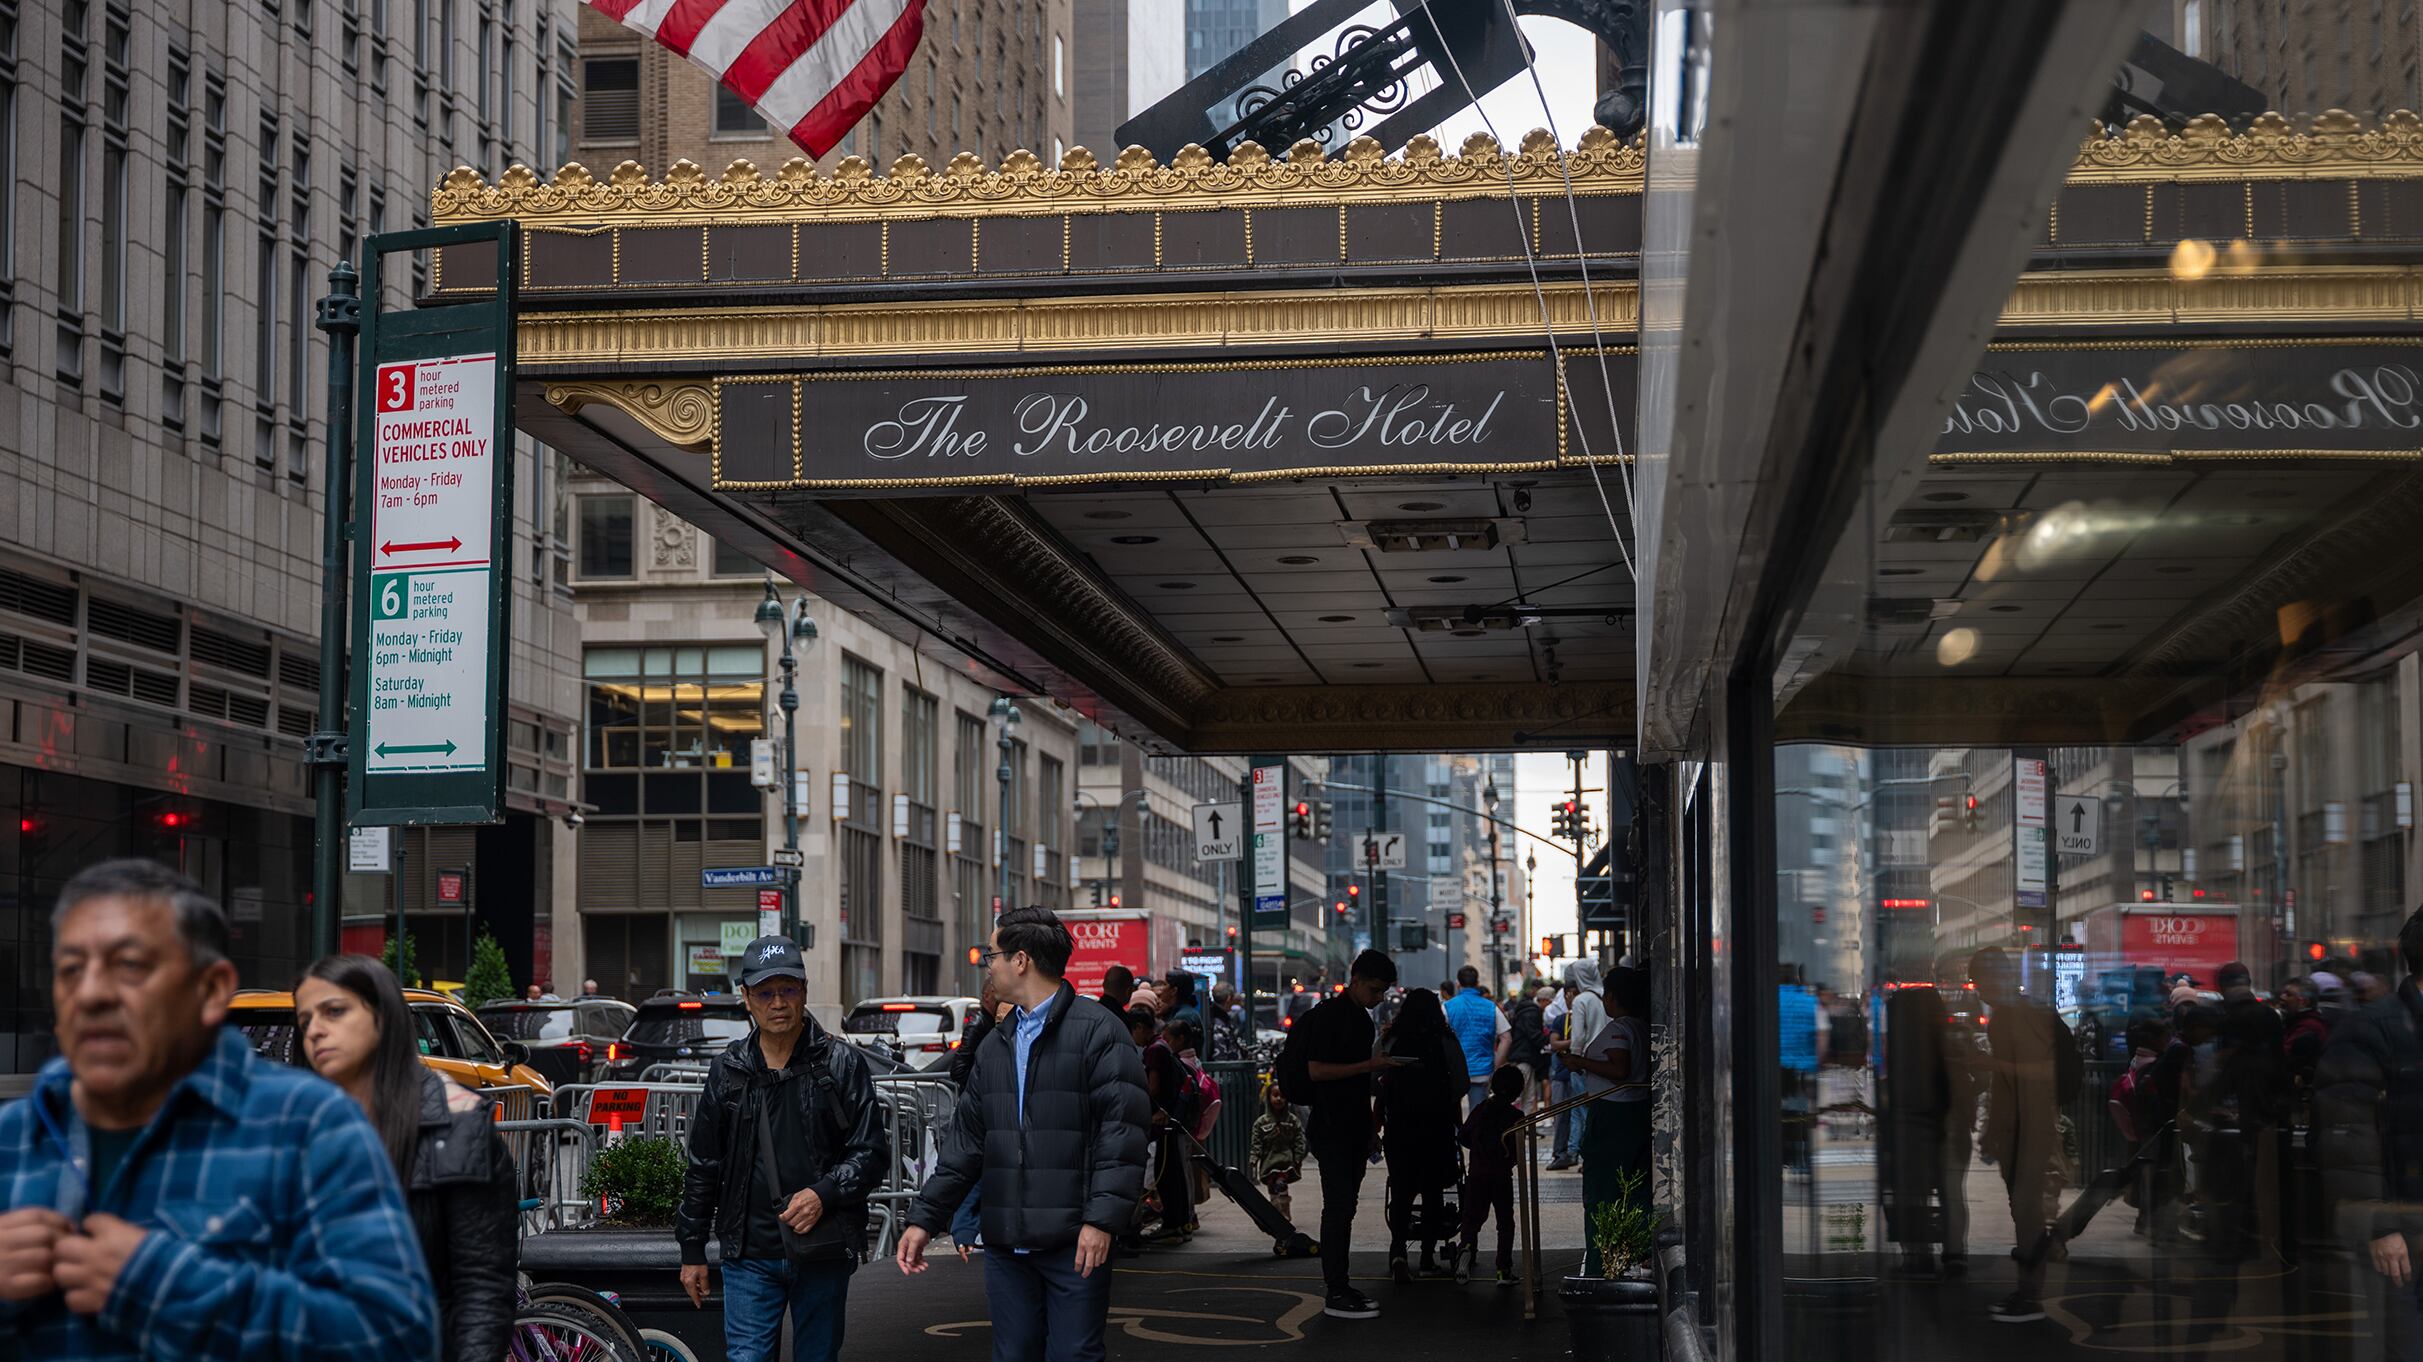 People walk on a sidewalk near a large window of a building with a large overhang with the words " The Roosevelt Hotel."